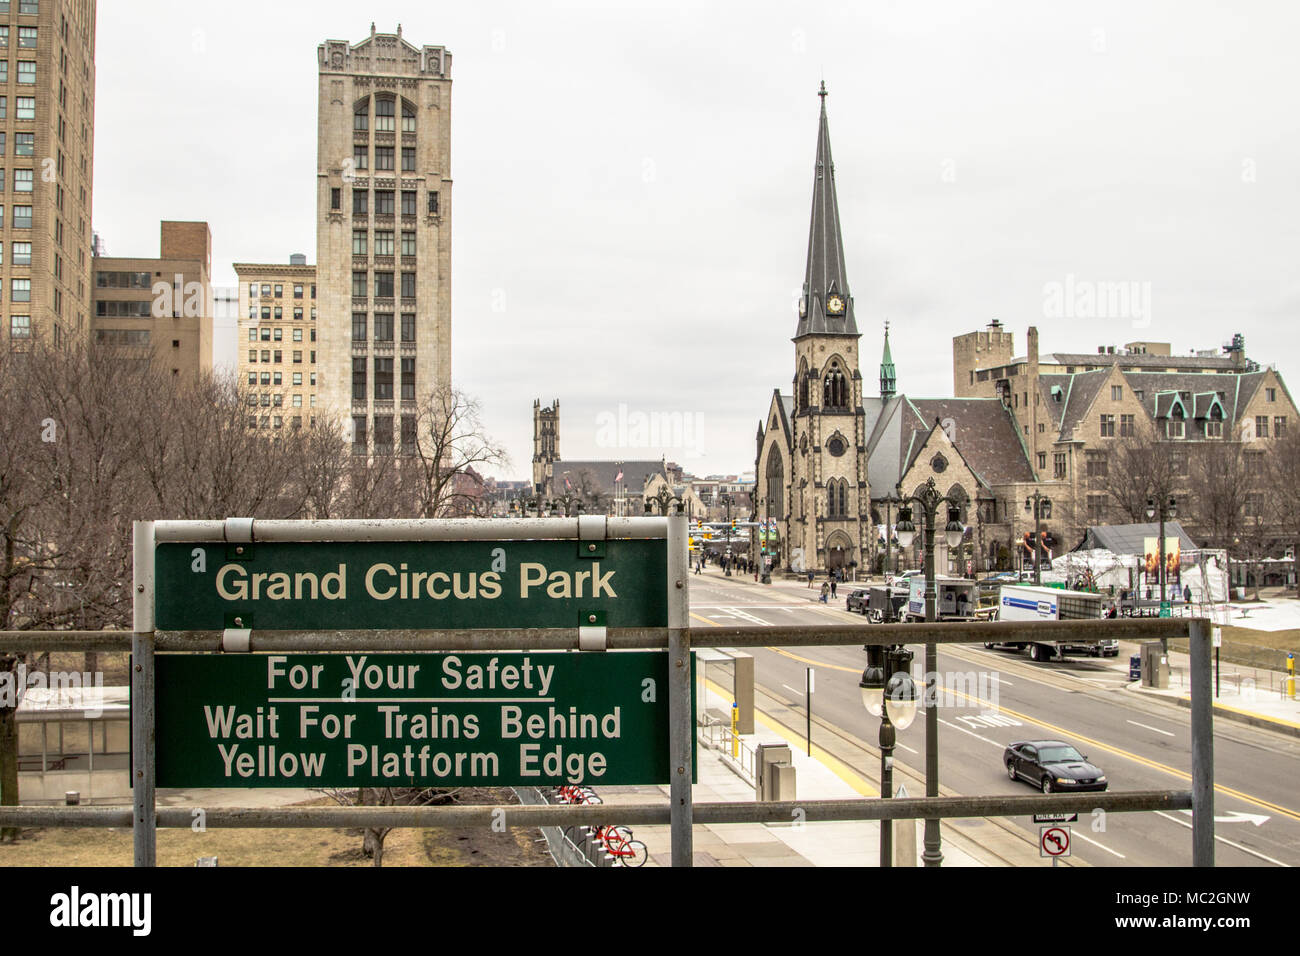 Detroit, Michigan, USA - March 28, 2018: The skyline and city streets of the historic Grand Circus Park neighborhood of downtown Detroit, Michigan. Stock Photo